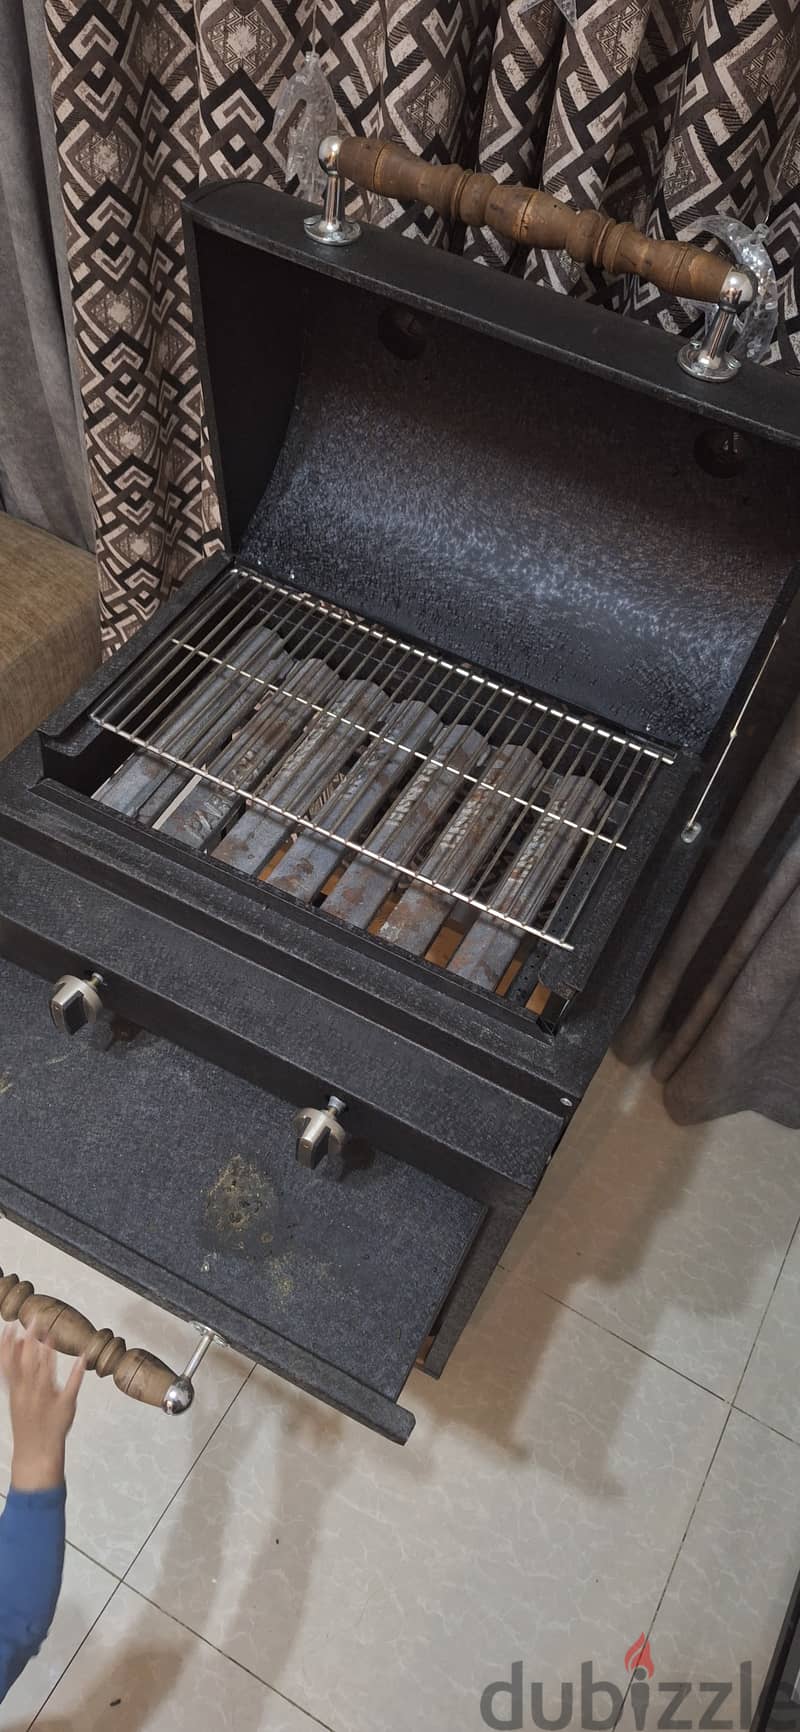 2 burner gas barbecue grill . . plz contact call / WhatsApp 92244820 5